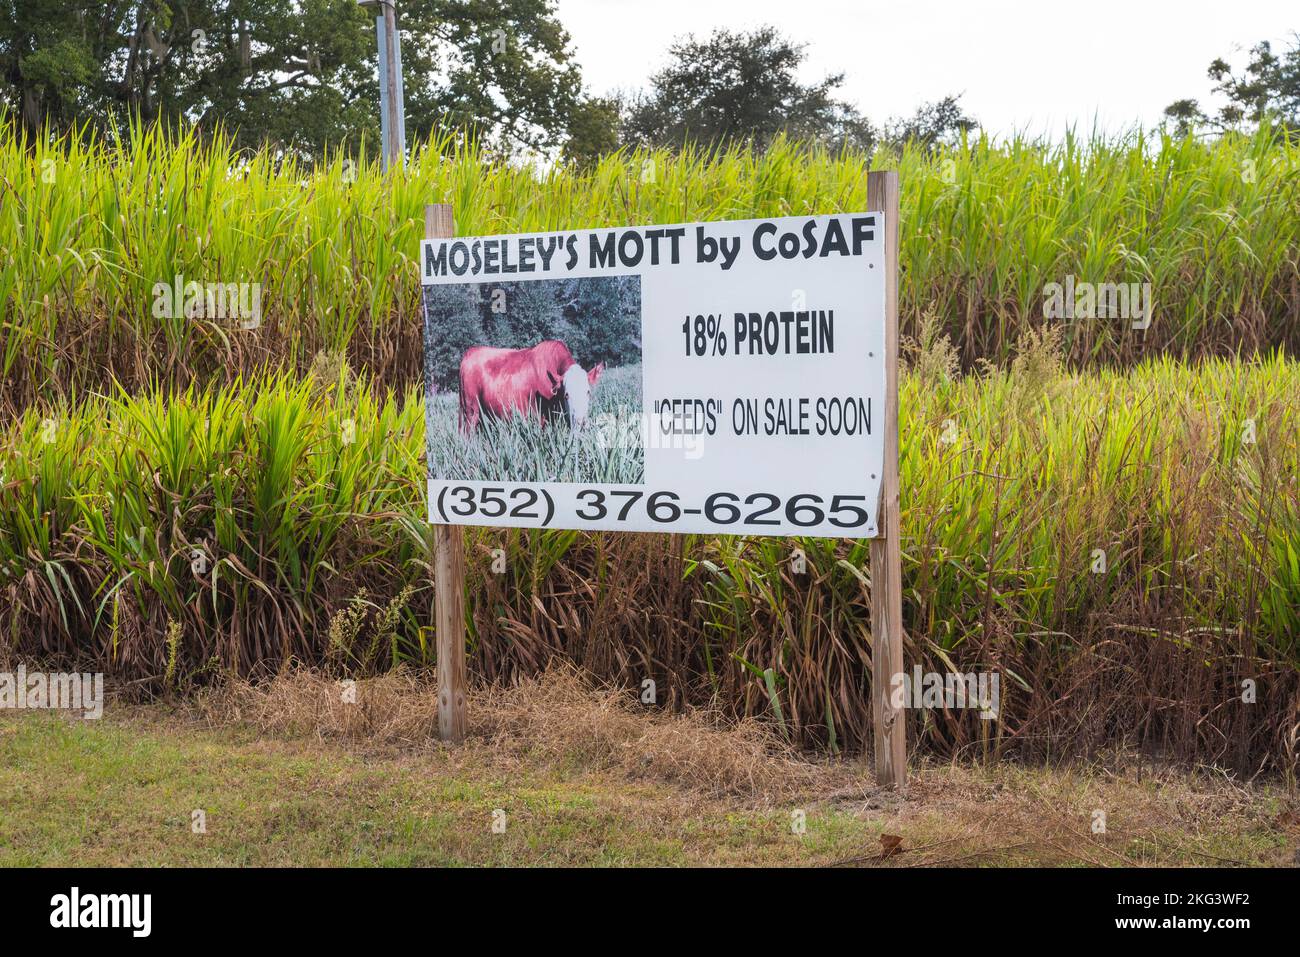 Moseley's Mott by CoSAF is a forage grass of the highest quality for beef and is a new cultivar of Pennesetum Purpureum or elephant grass from Africa. Stock Photo